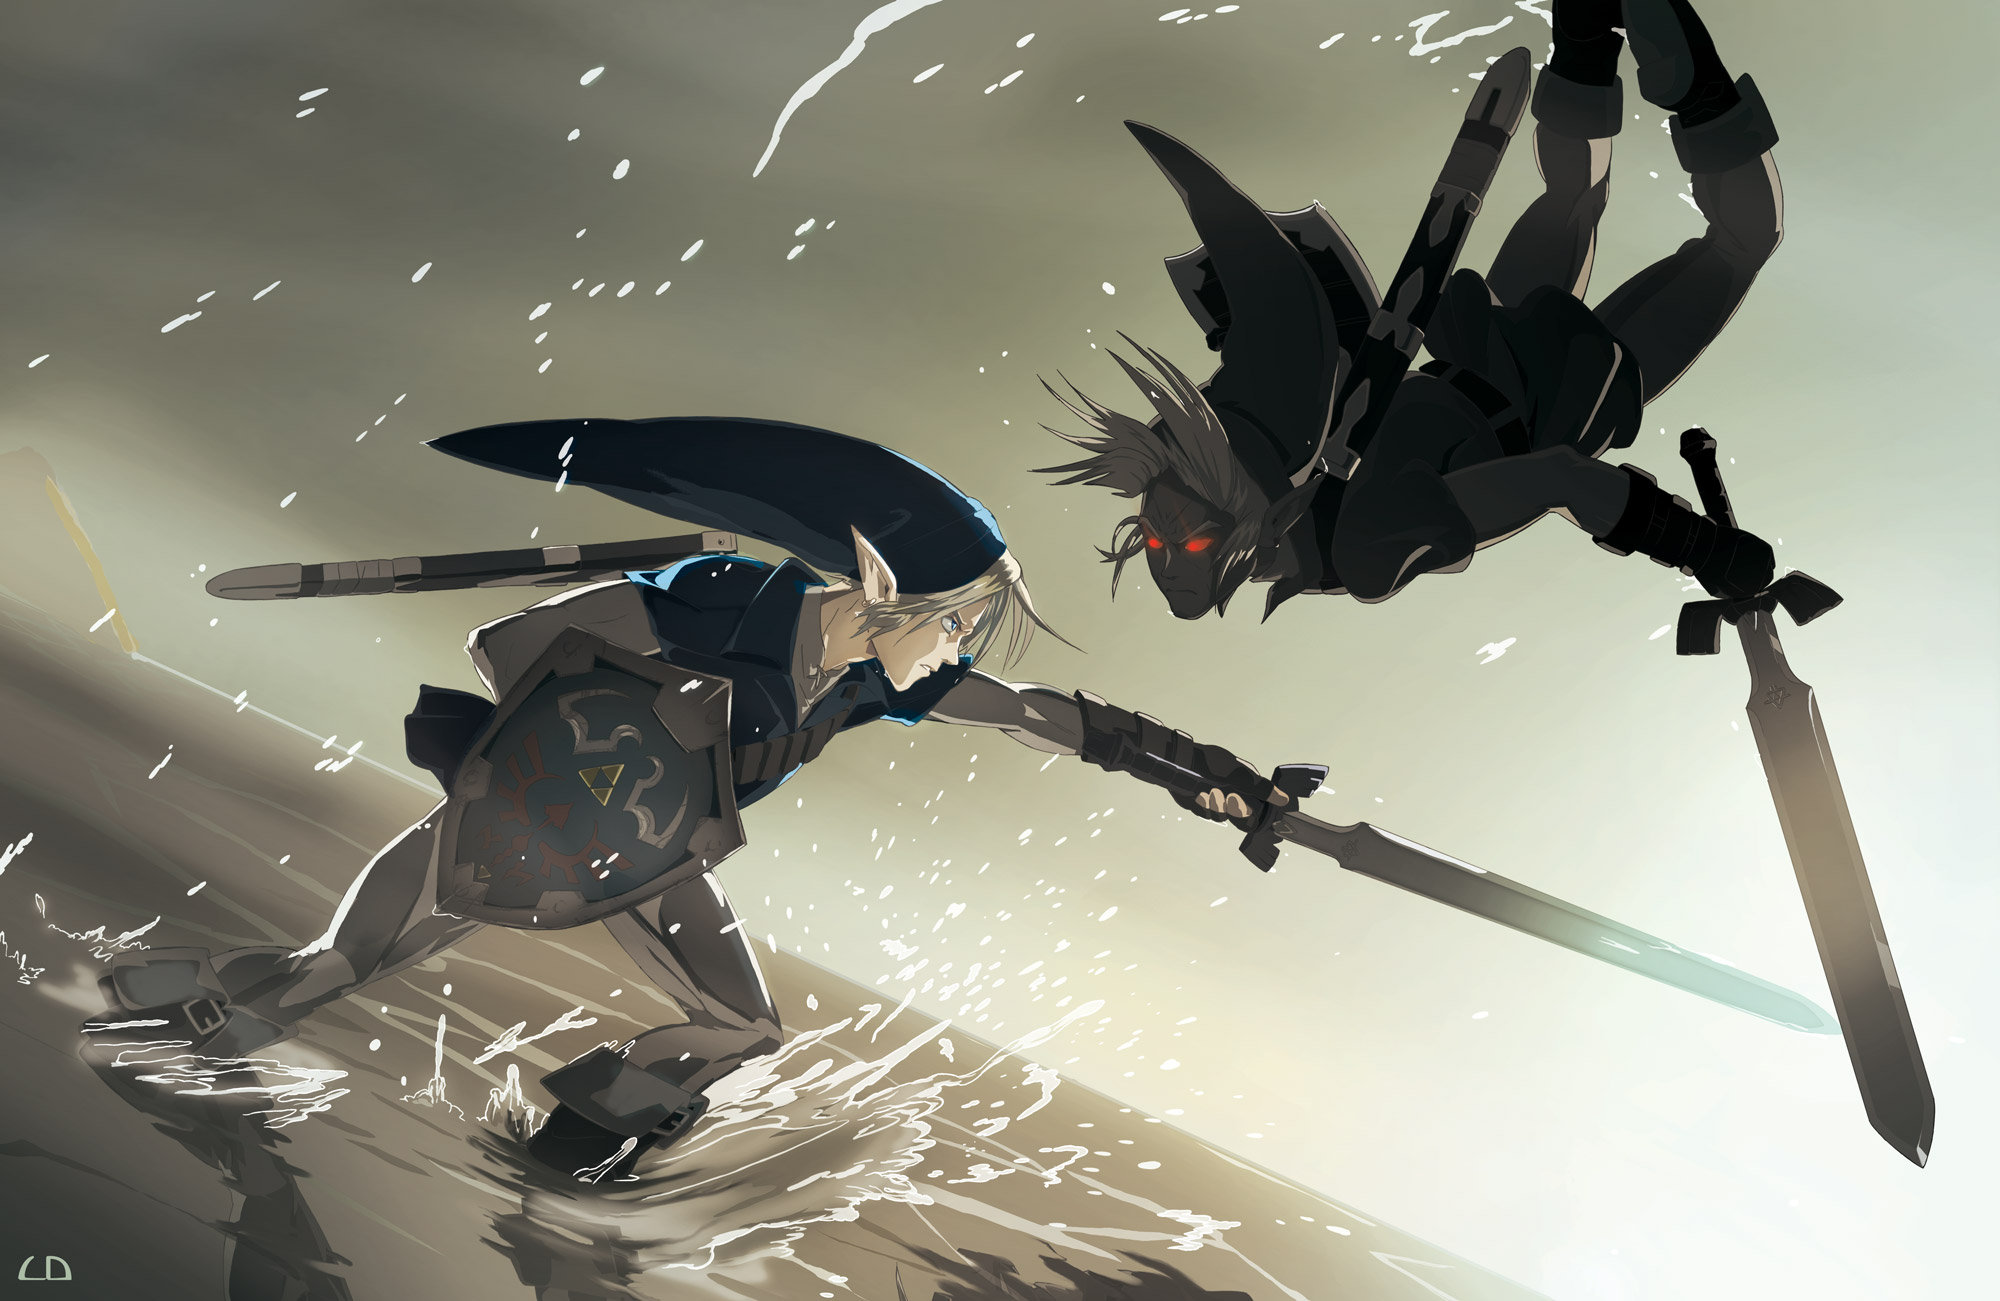 link and dark link fighting